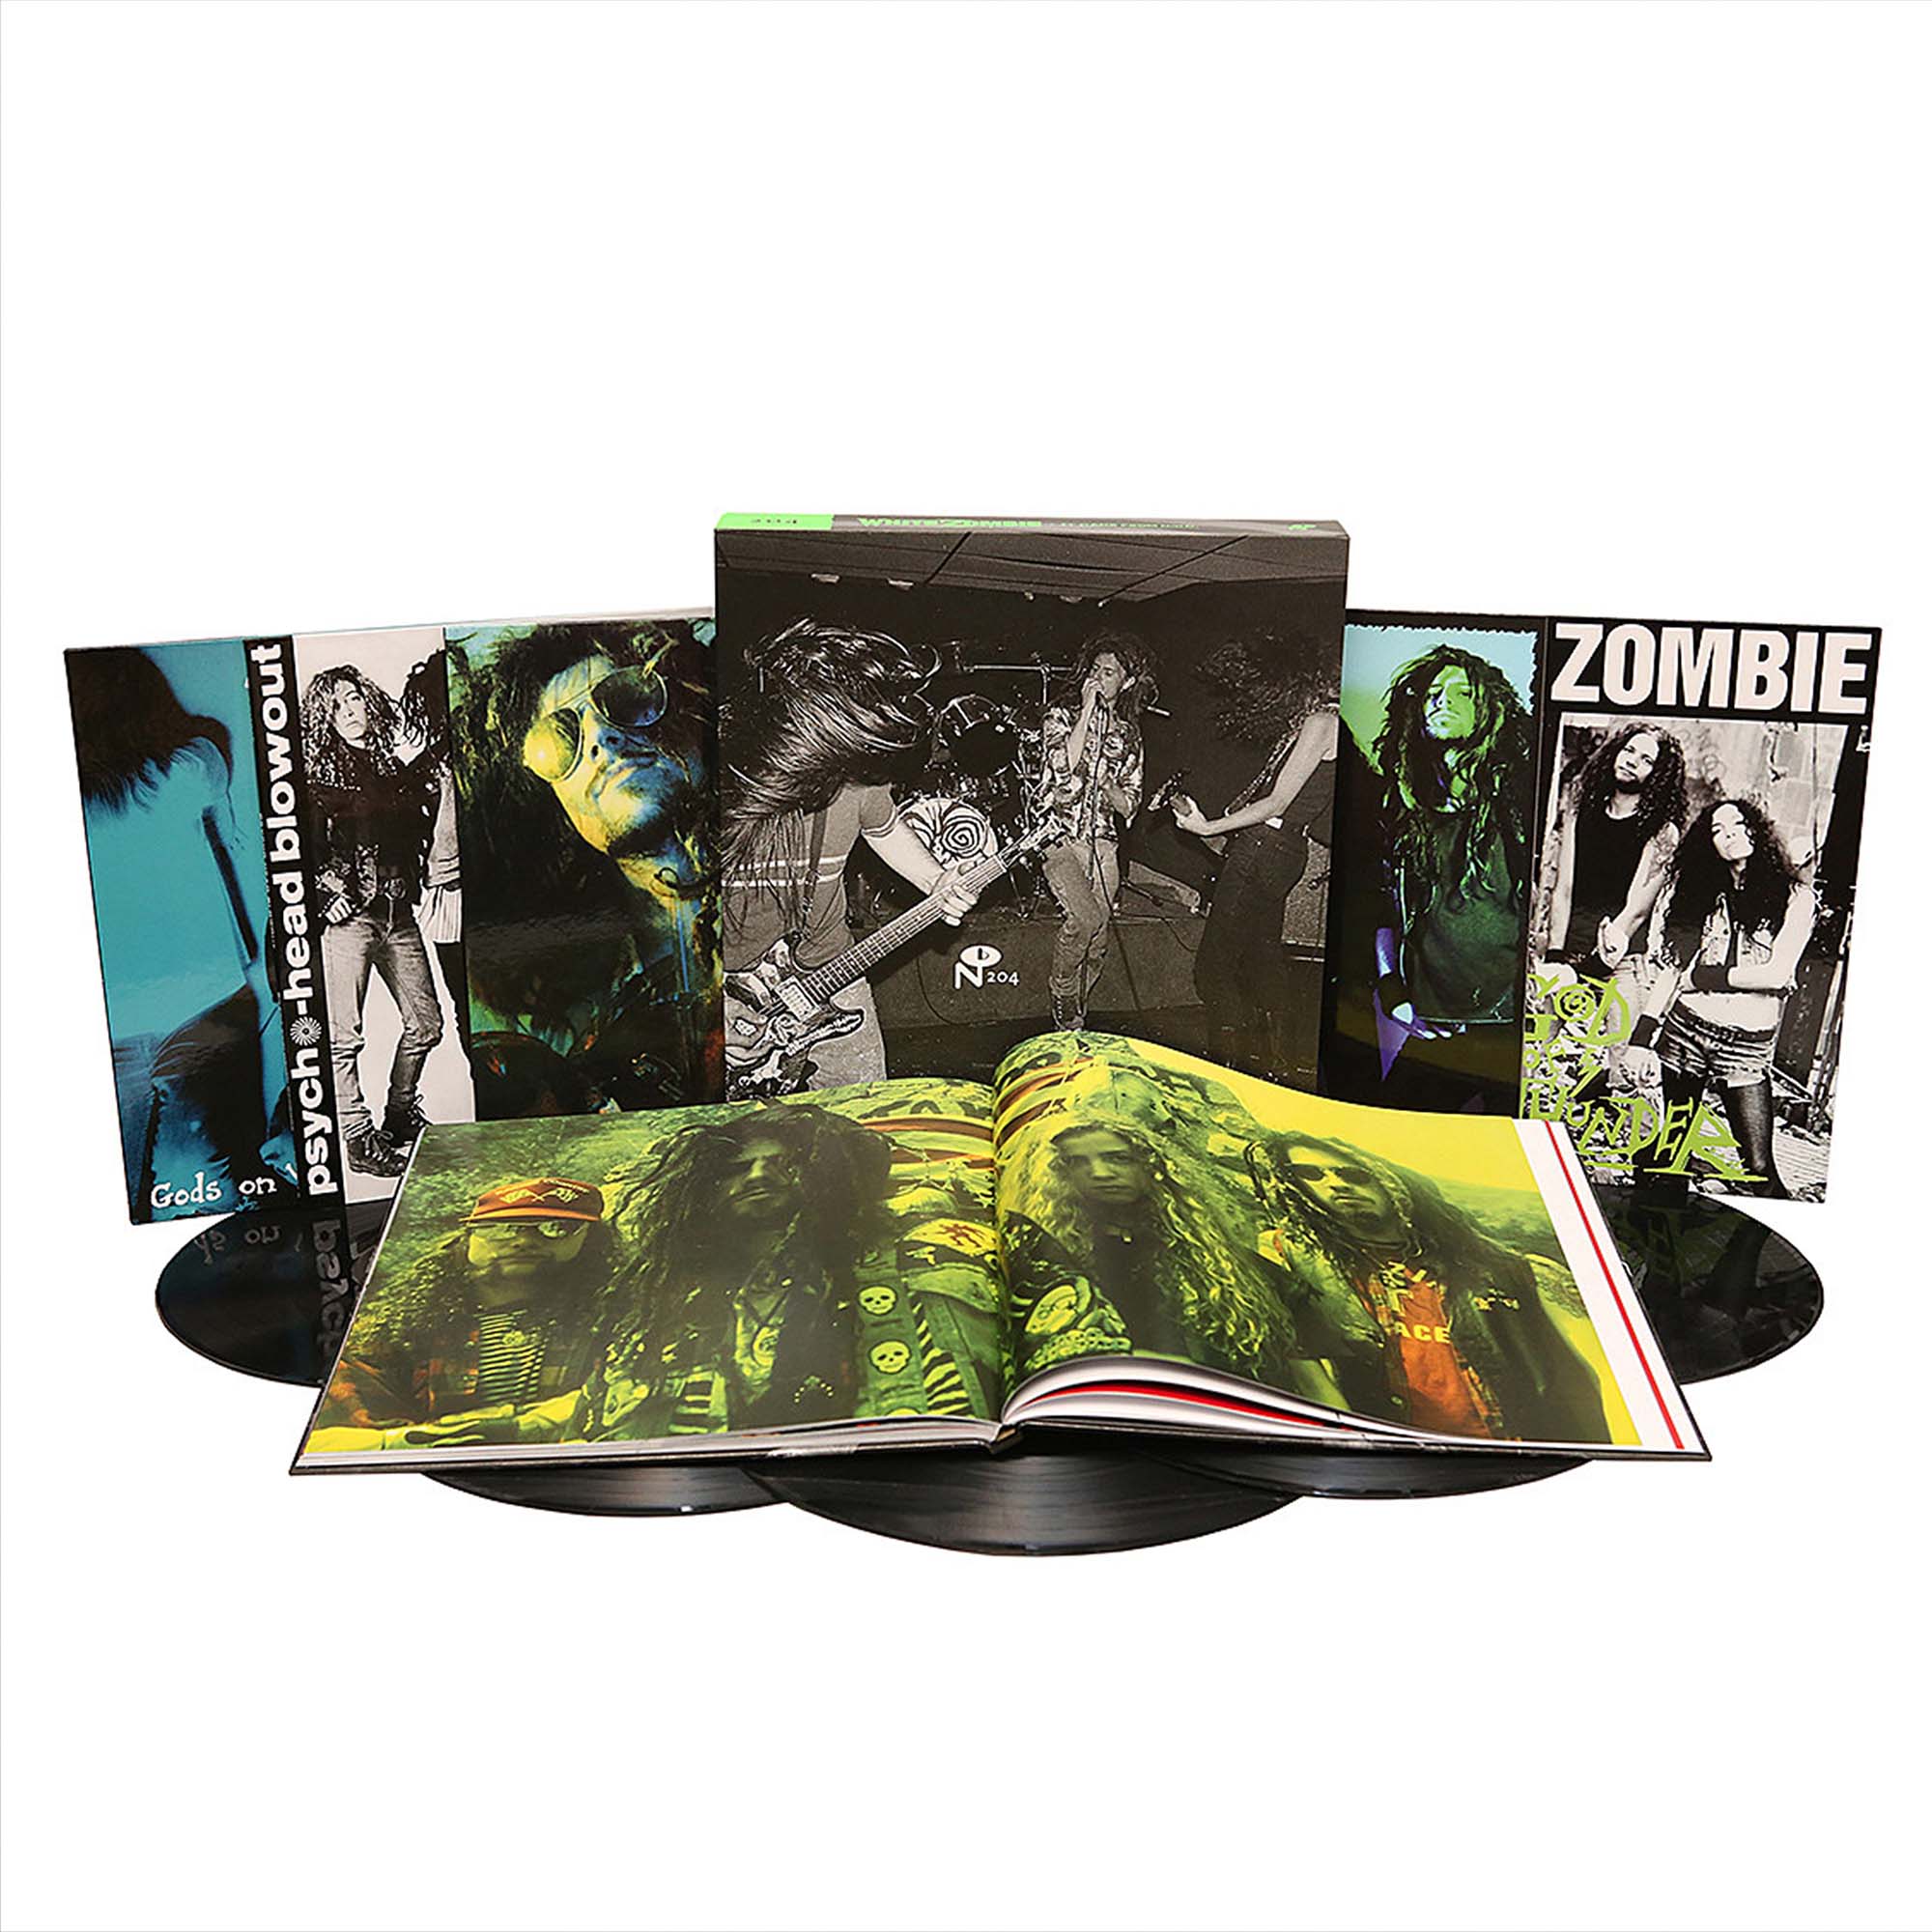 WHITE ZOMBIE  IT CAME FROM  LP BOX